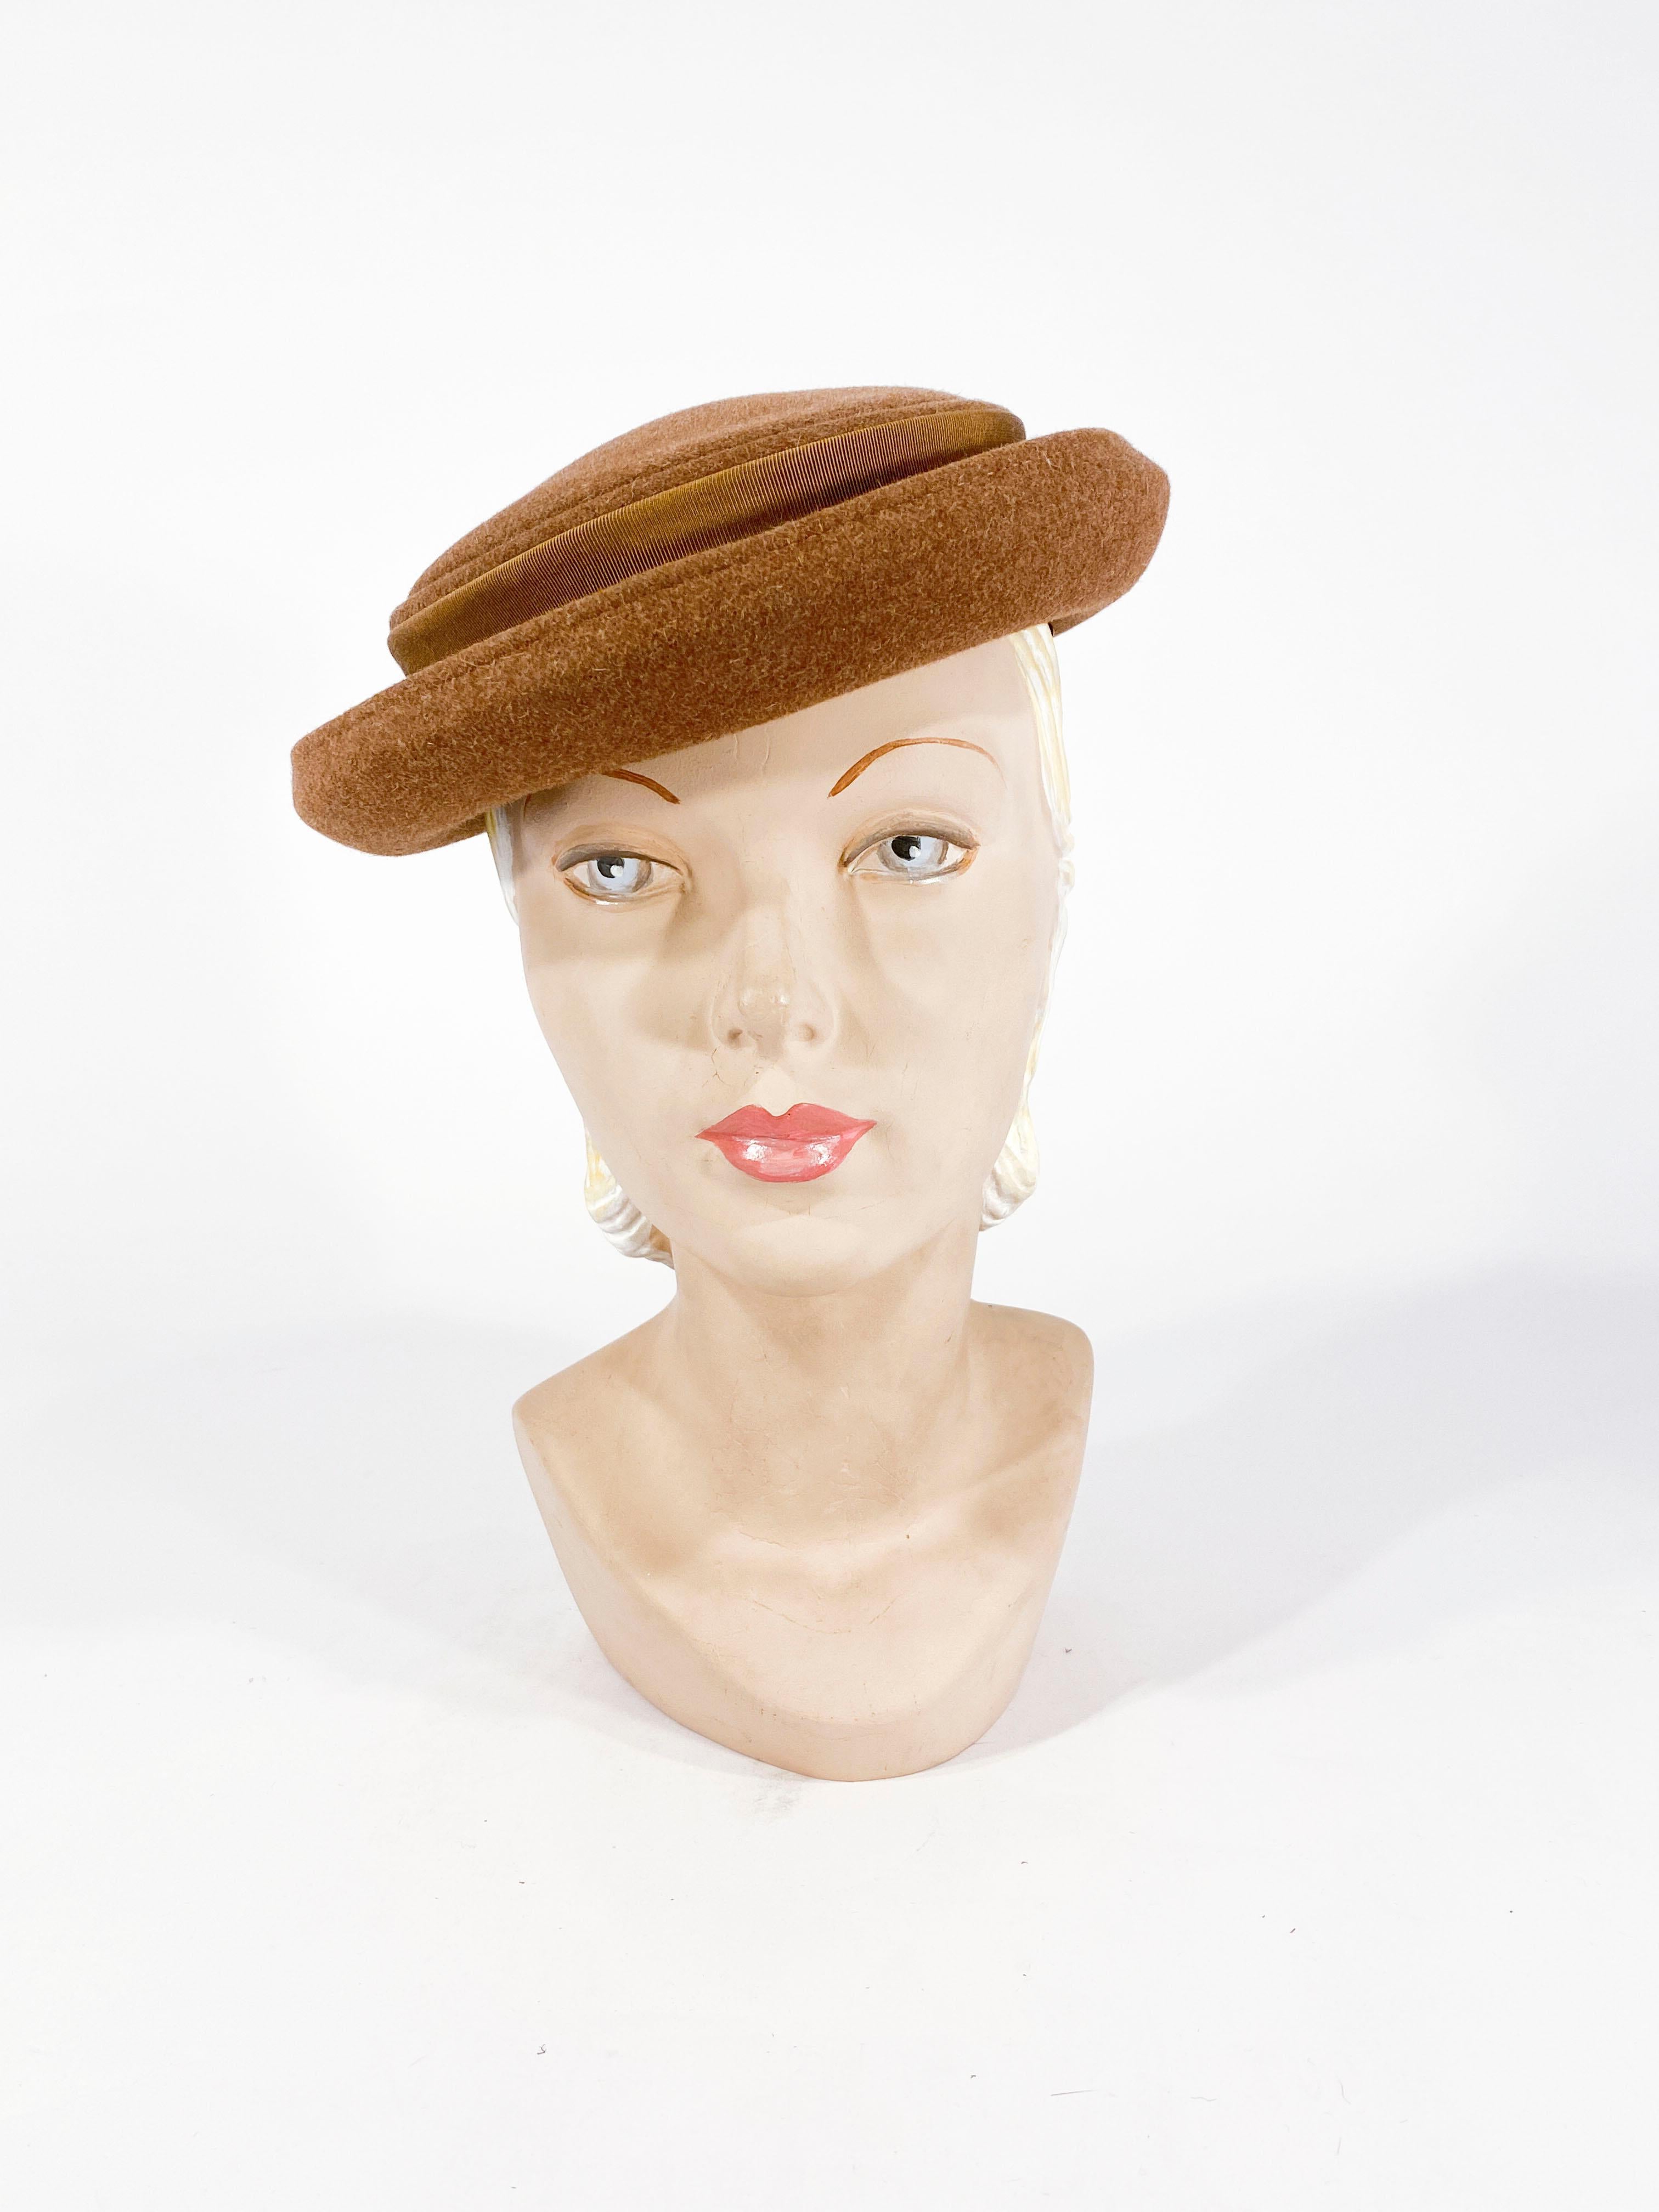 Late 1940s to Early 1950s taupe-colored beaver fur felt hat with hand rolled brim and the crown is finished with a grosgrain band and bow.